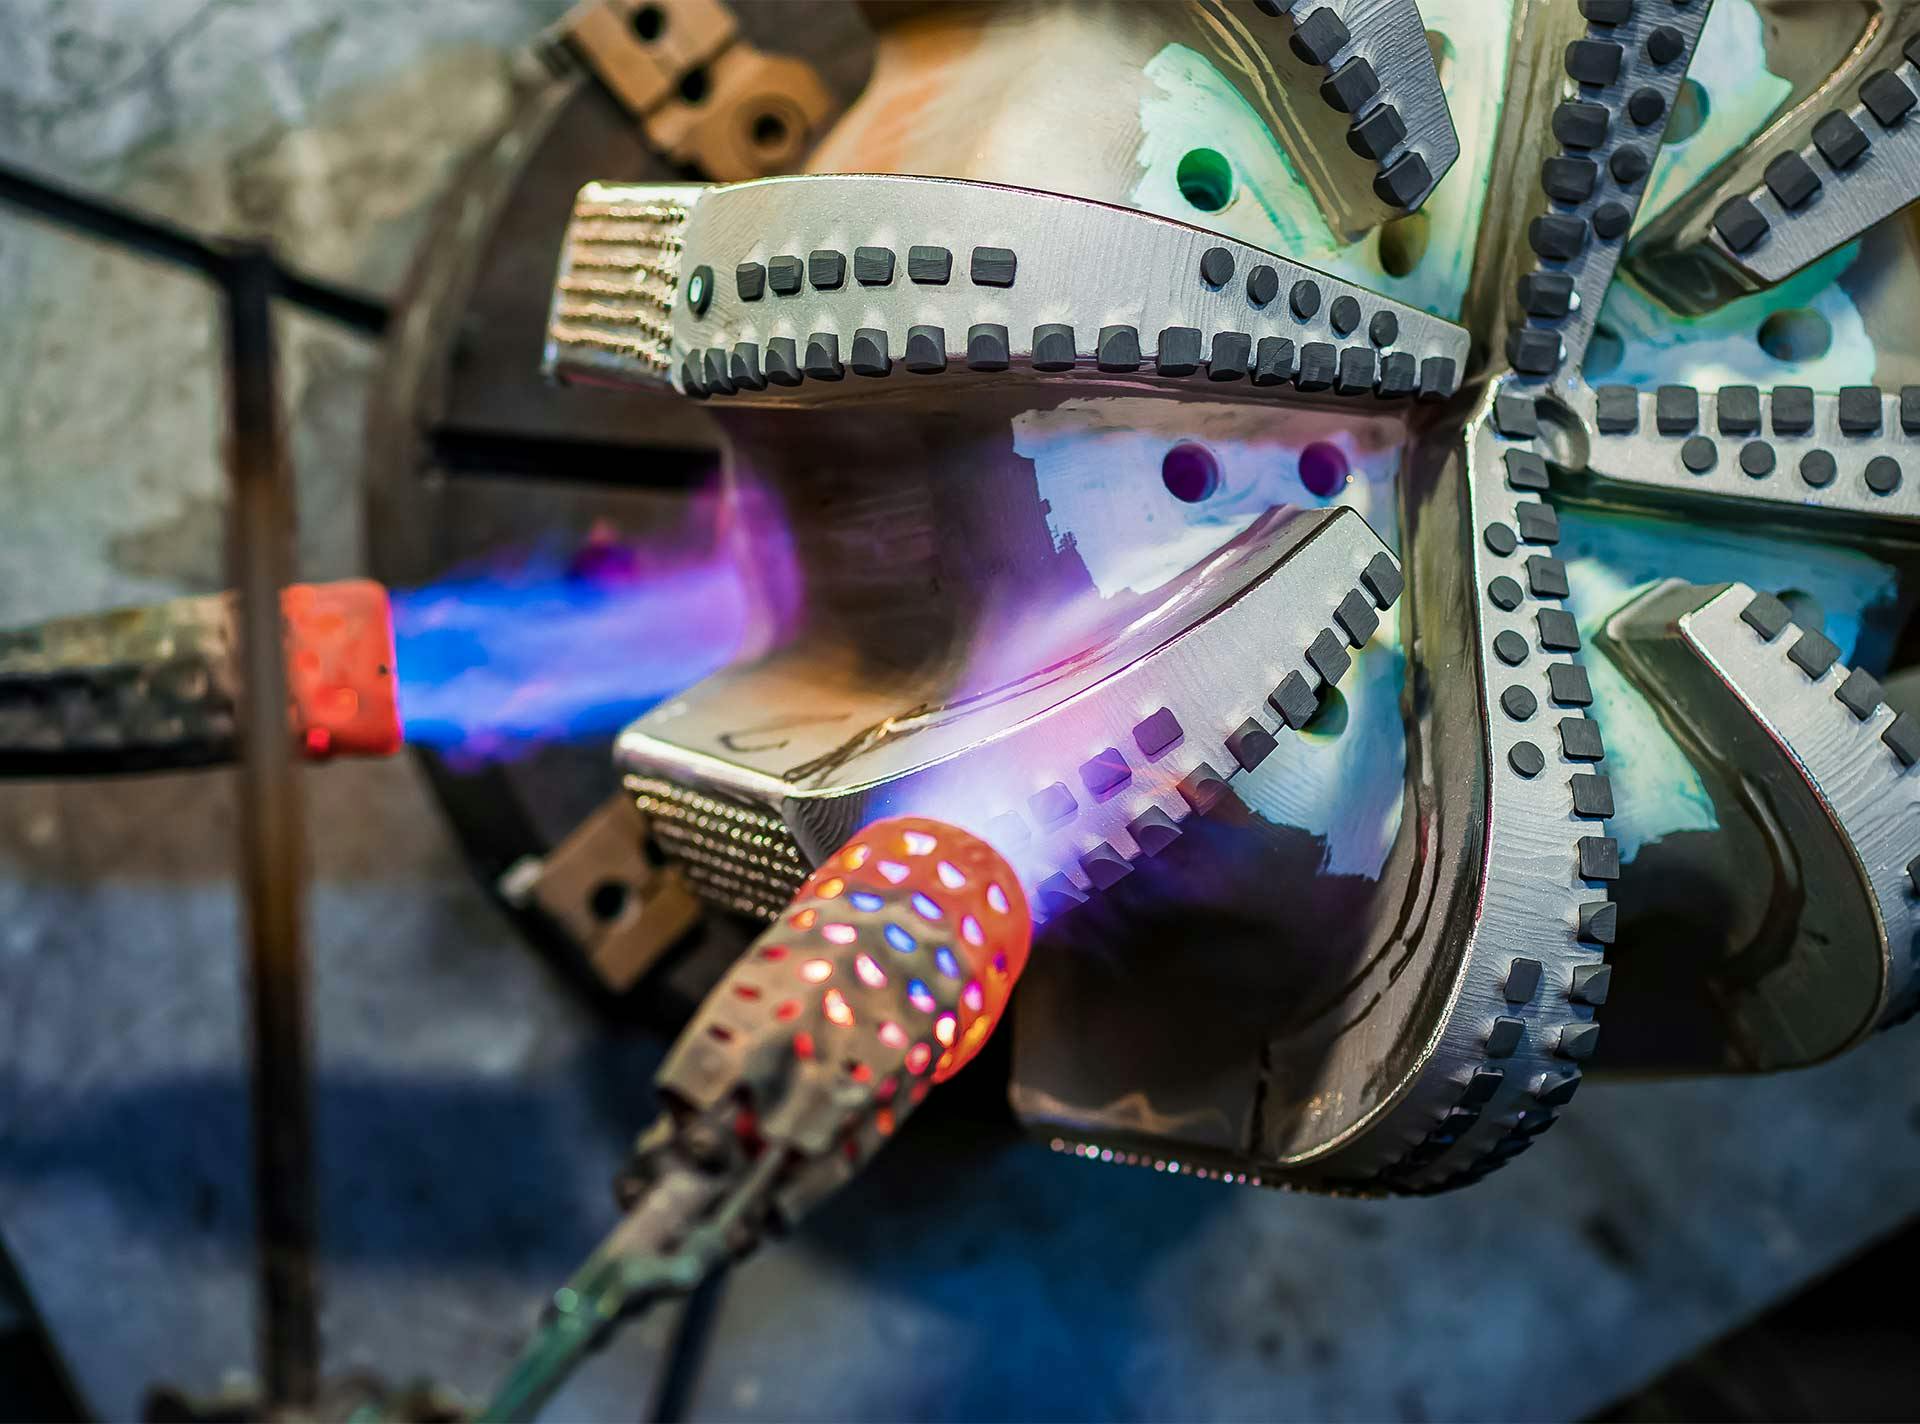 A drill bit being heated during repair